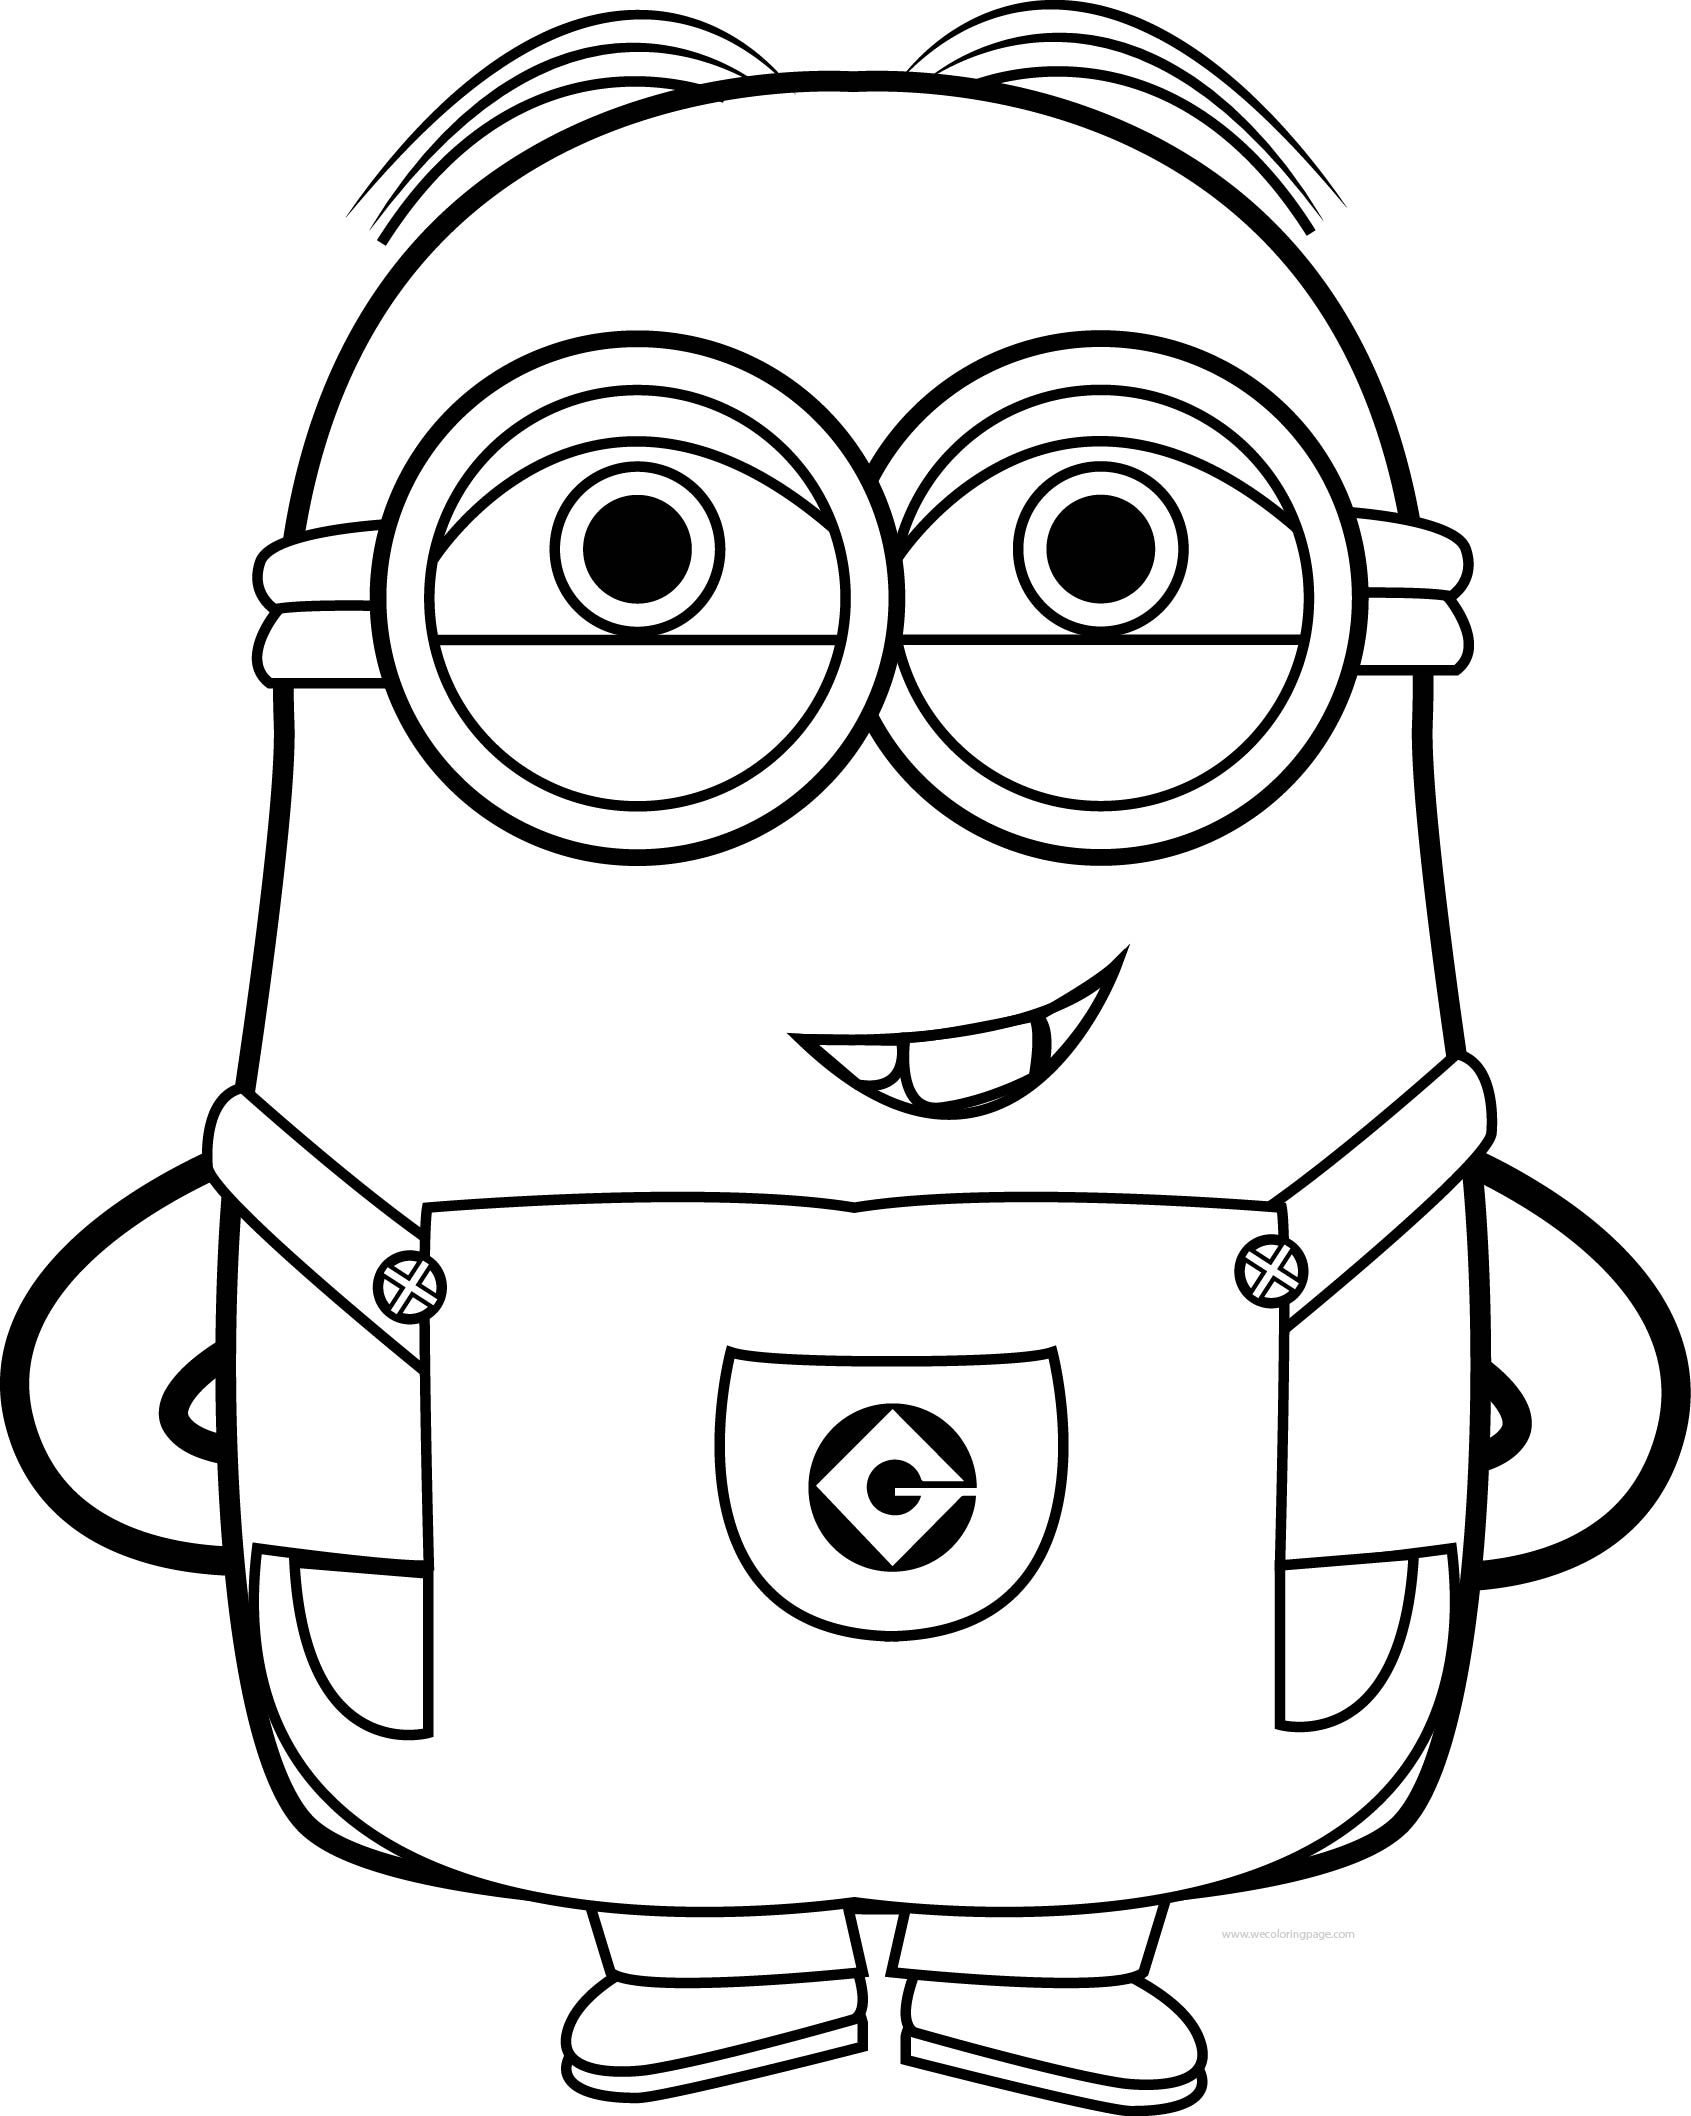 Cute Minion Coloring Pages at GetColorings com Free printable